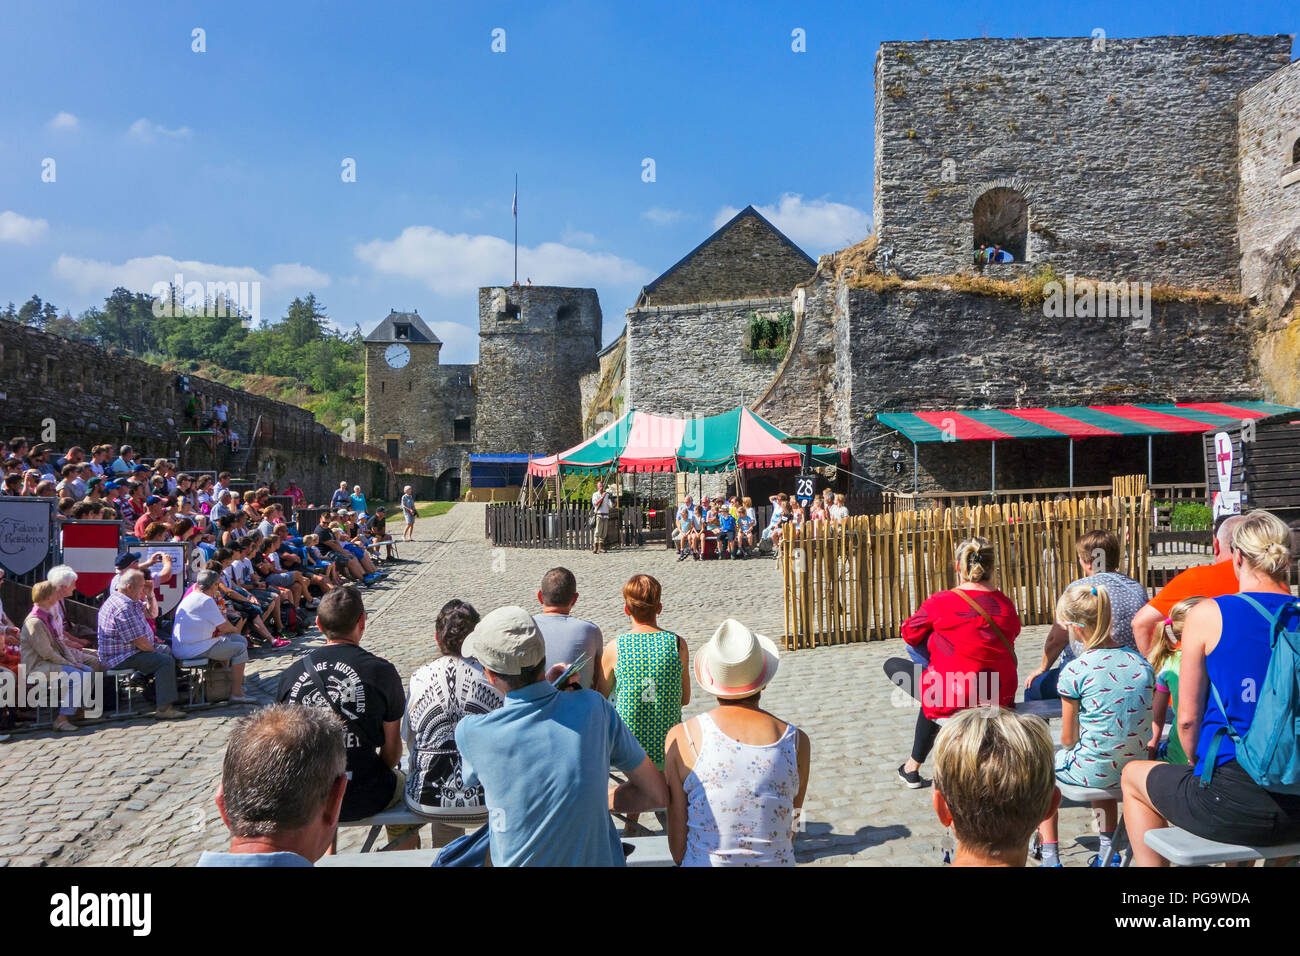 Tourists watching falconry / bird of prey show in the Château de Bouillon Castle, Luxembourg Province, Belgian Ardennes, Belgium Stock Photo